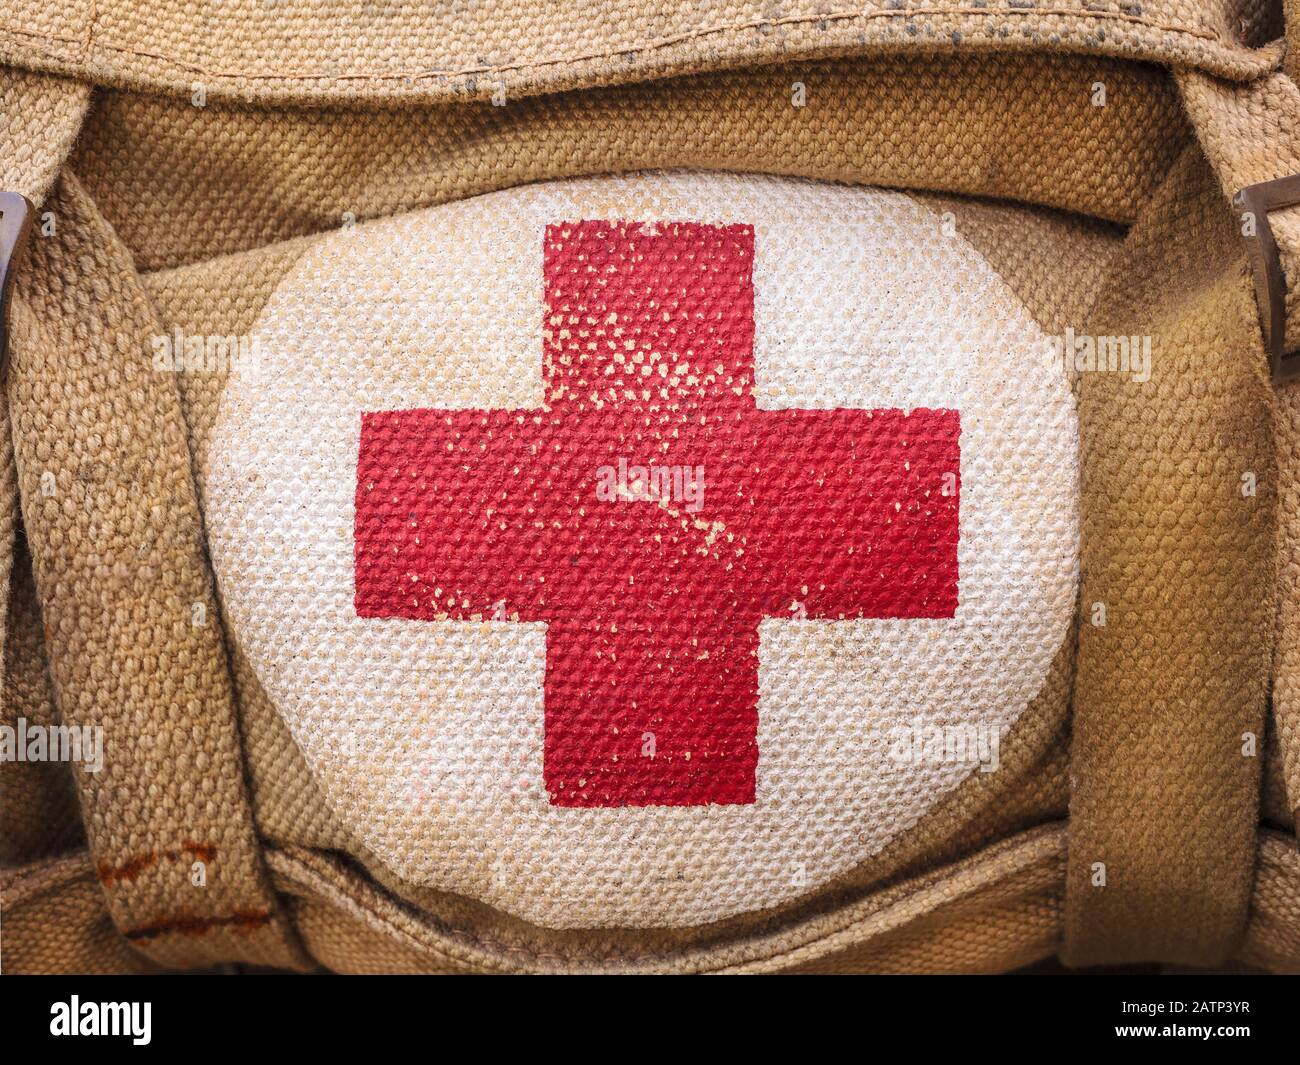 Red cross medical aid symbol on a vintage jute army bag Stock Photo - Alamy